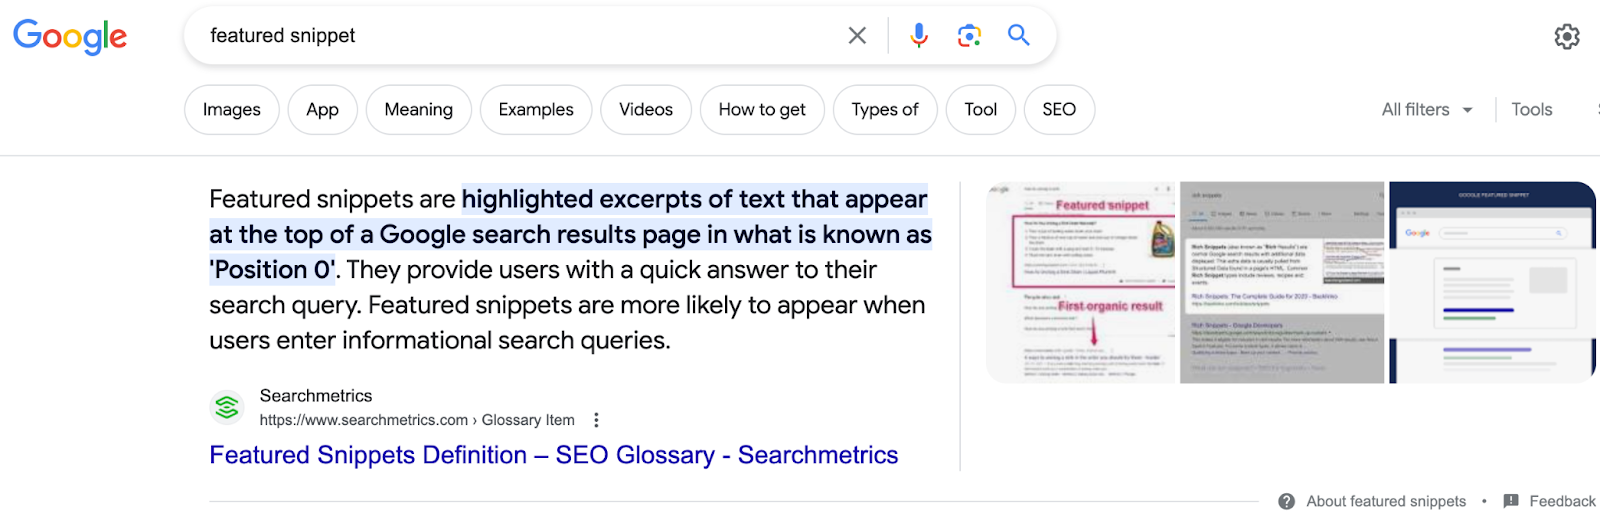 Featured snippet for the Google search query "featured snippets"